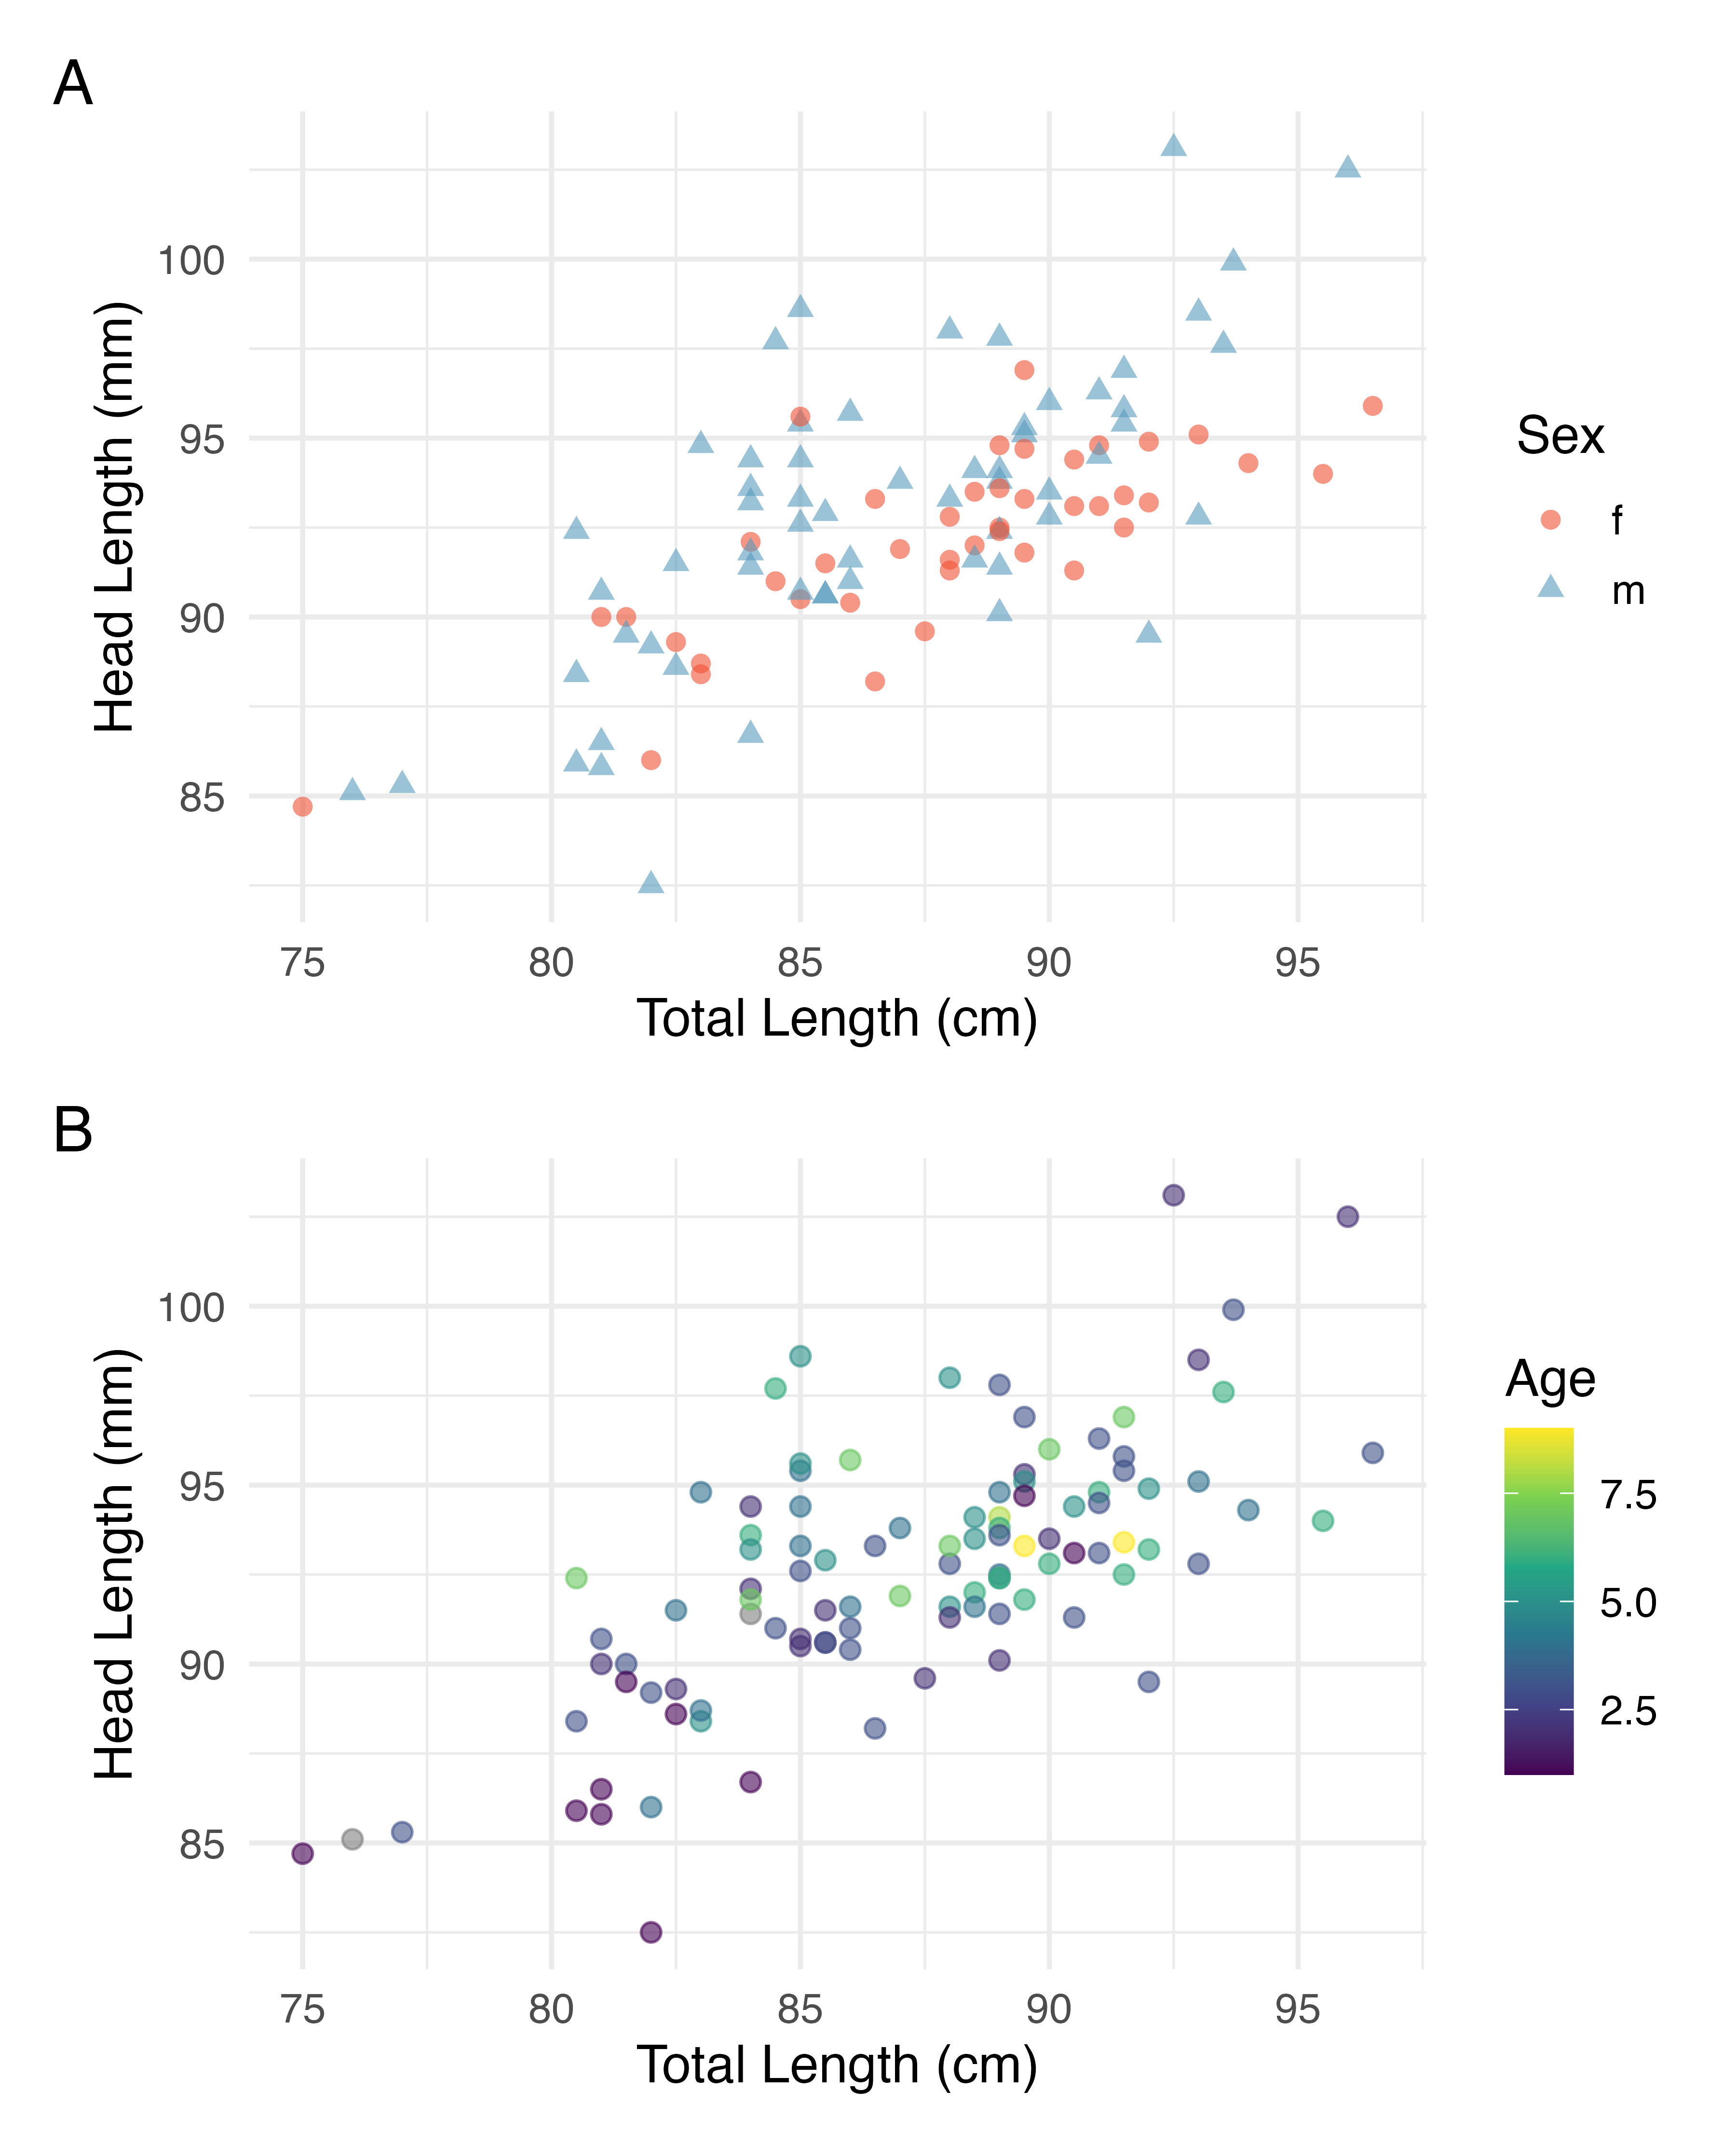 Relationship between total length and head lentgh of brushtail possums, taking into consideration their sex (Plot A) or age (Plot B).